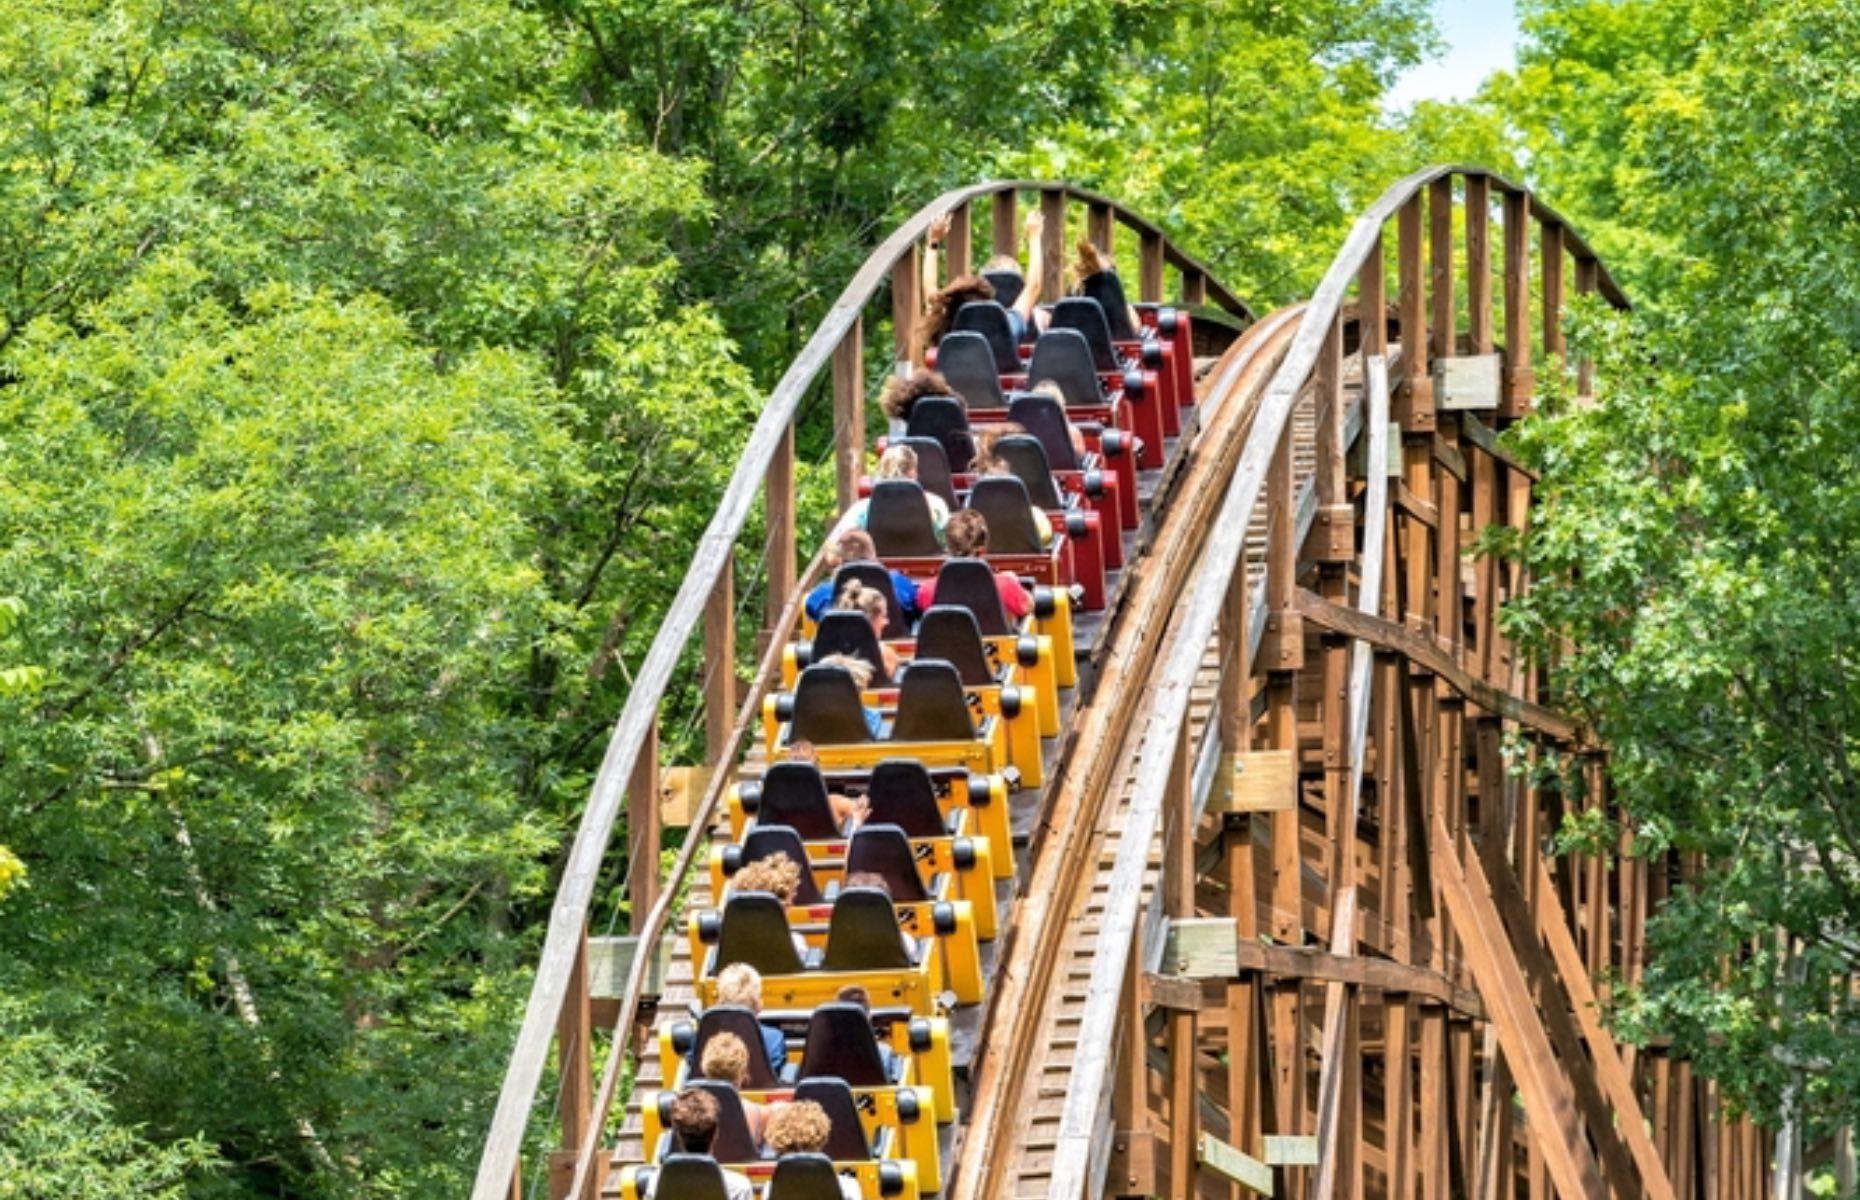 <p>Aptly named The Beast, this is the longest wooden roller coaster in the world stretching for a staggering 7,361 feet. Set on 35 acres of woodland, it was the longest and fastest roller coaster in the world when it opened back in 1979.</p>  <p>The Beast has two vertical drops each over 135 feet, eight banked turns, a 125 feet tunnel and a 540° helix tunnel. It has held the longest wooden coaster mantle for over 40 years now.</p>